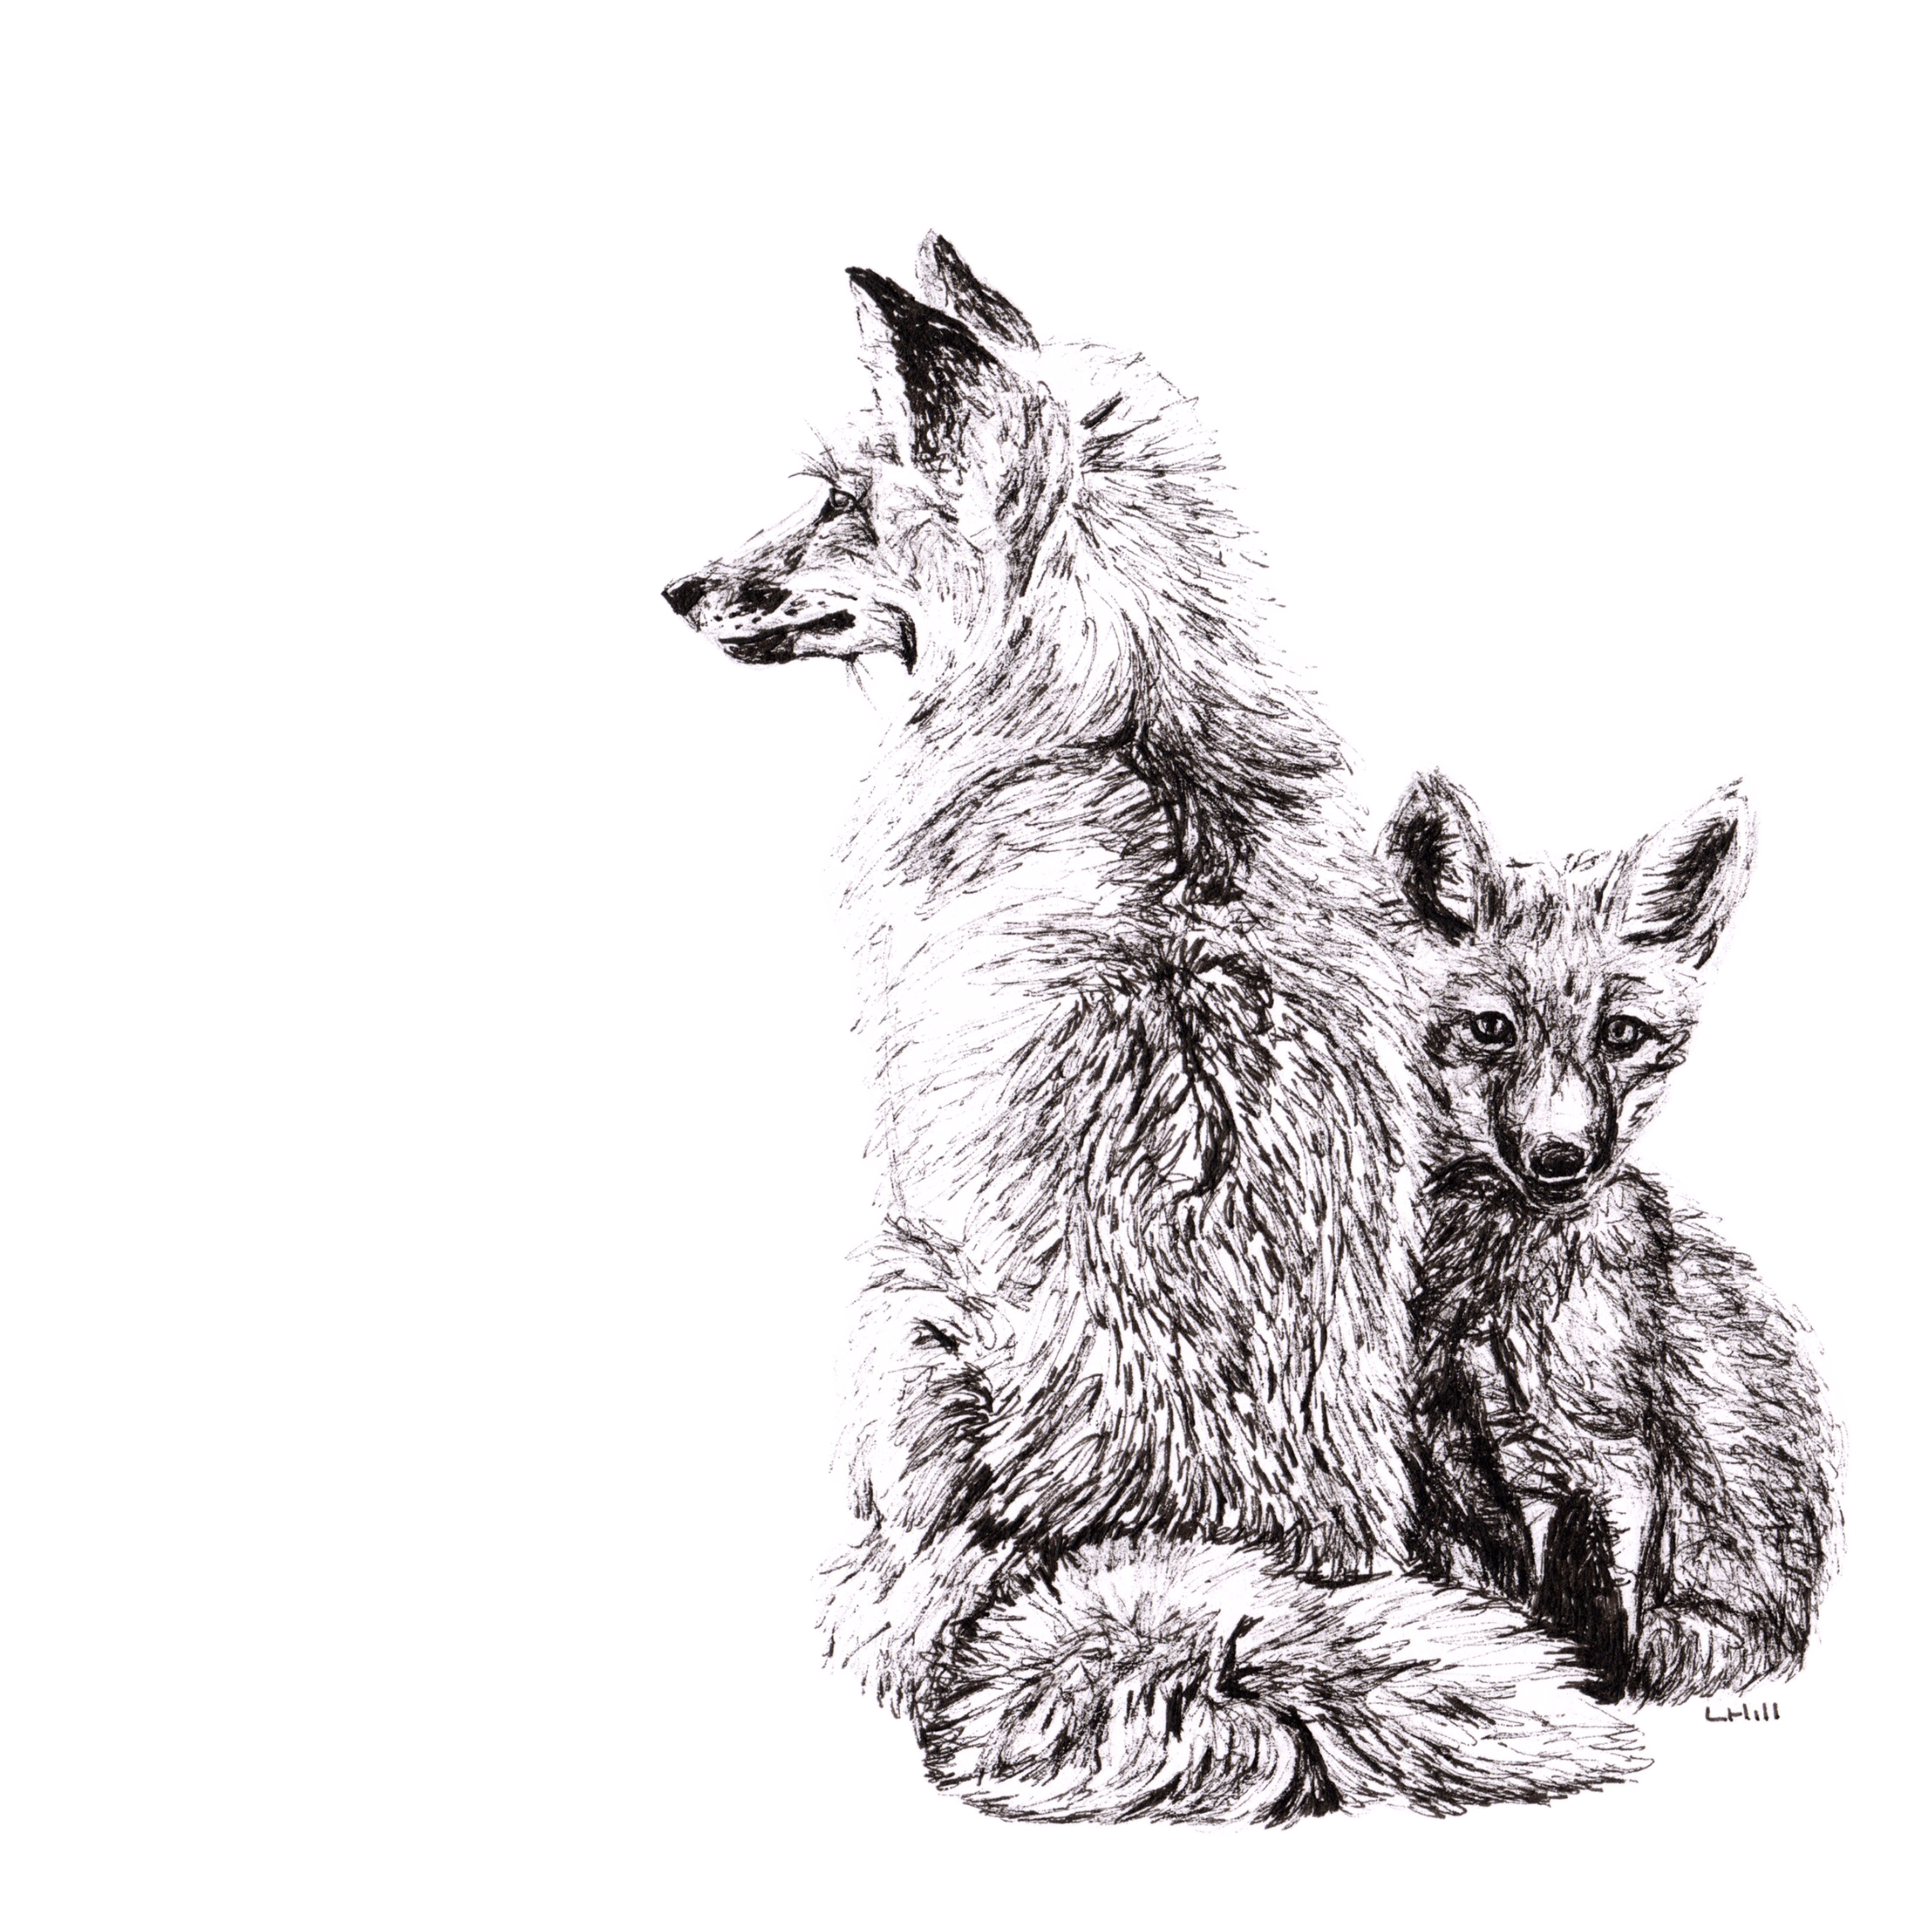 Fox and cub pen and ink illustration by Louisa Hill